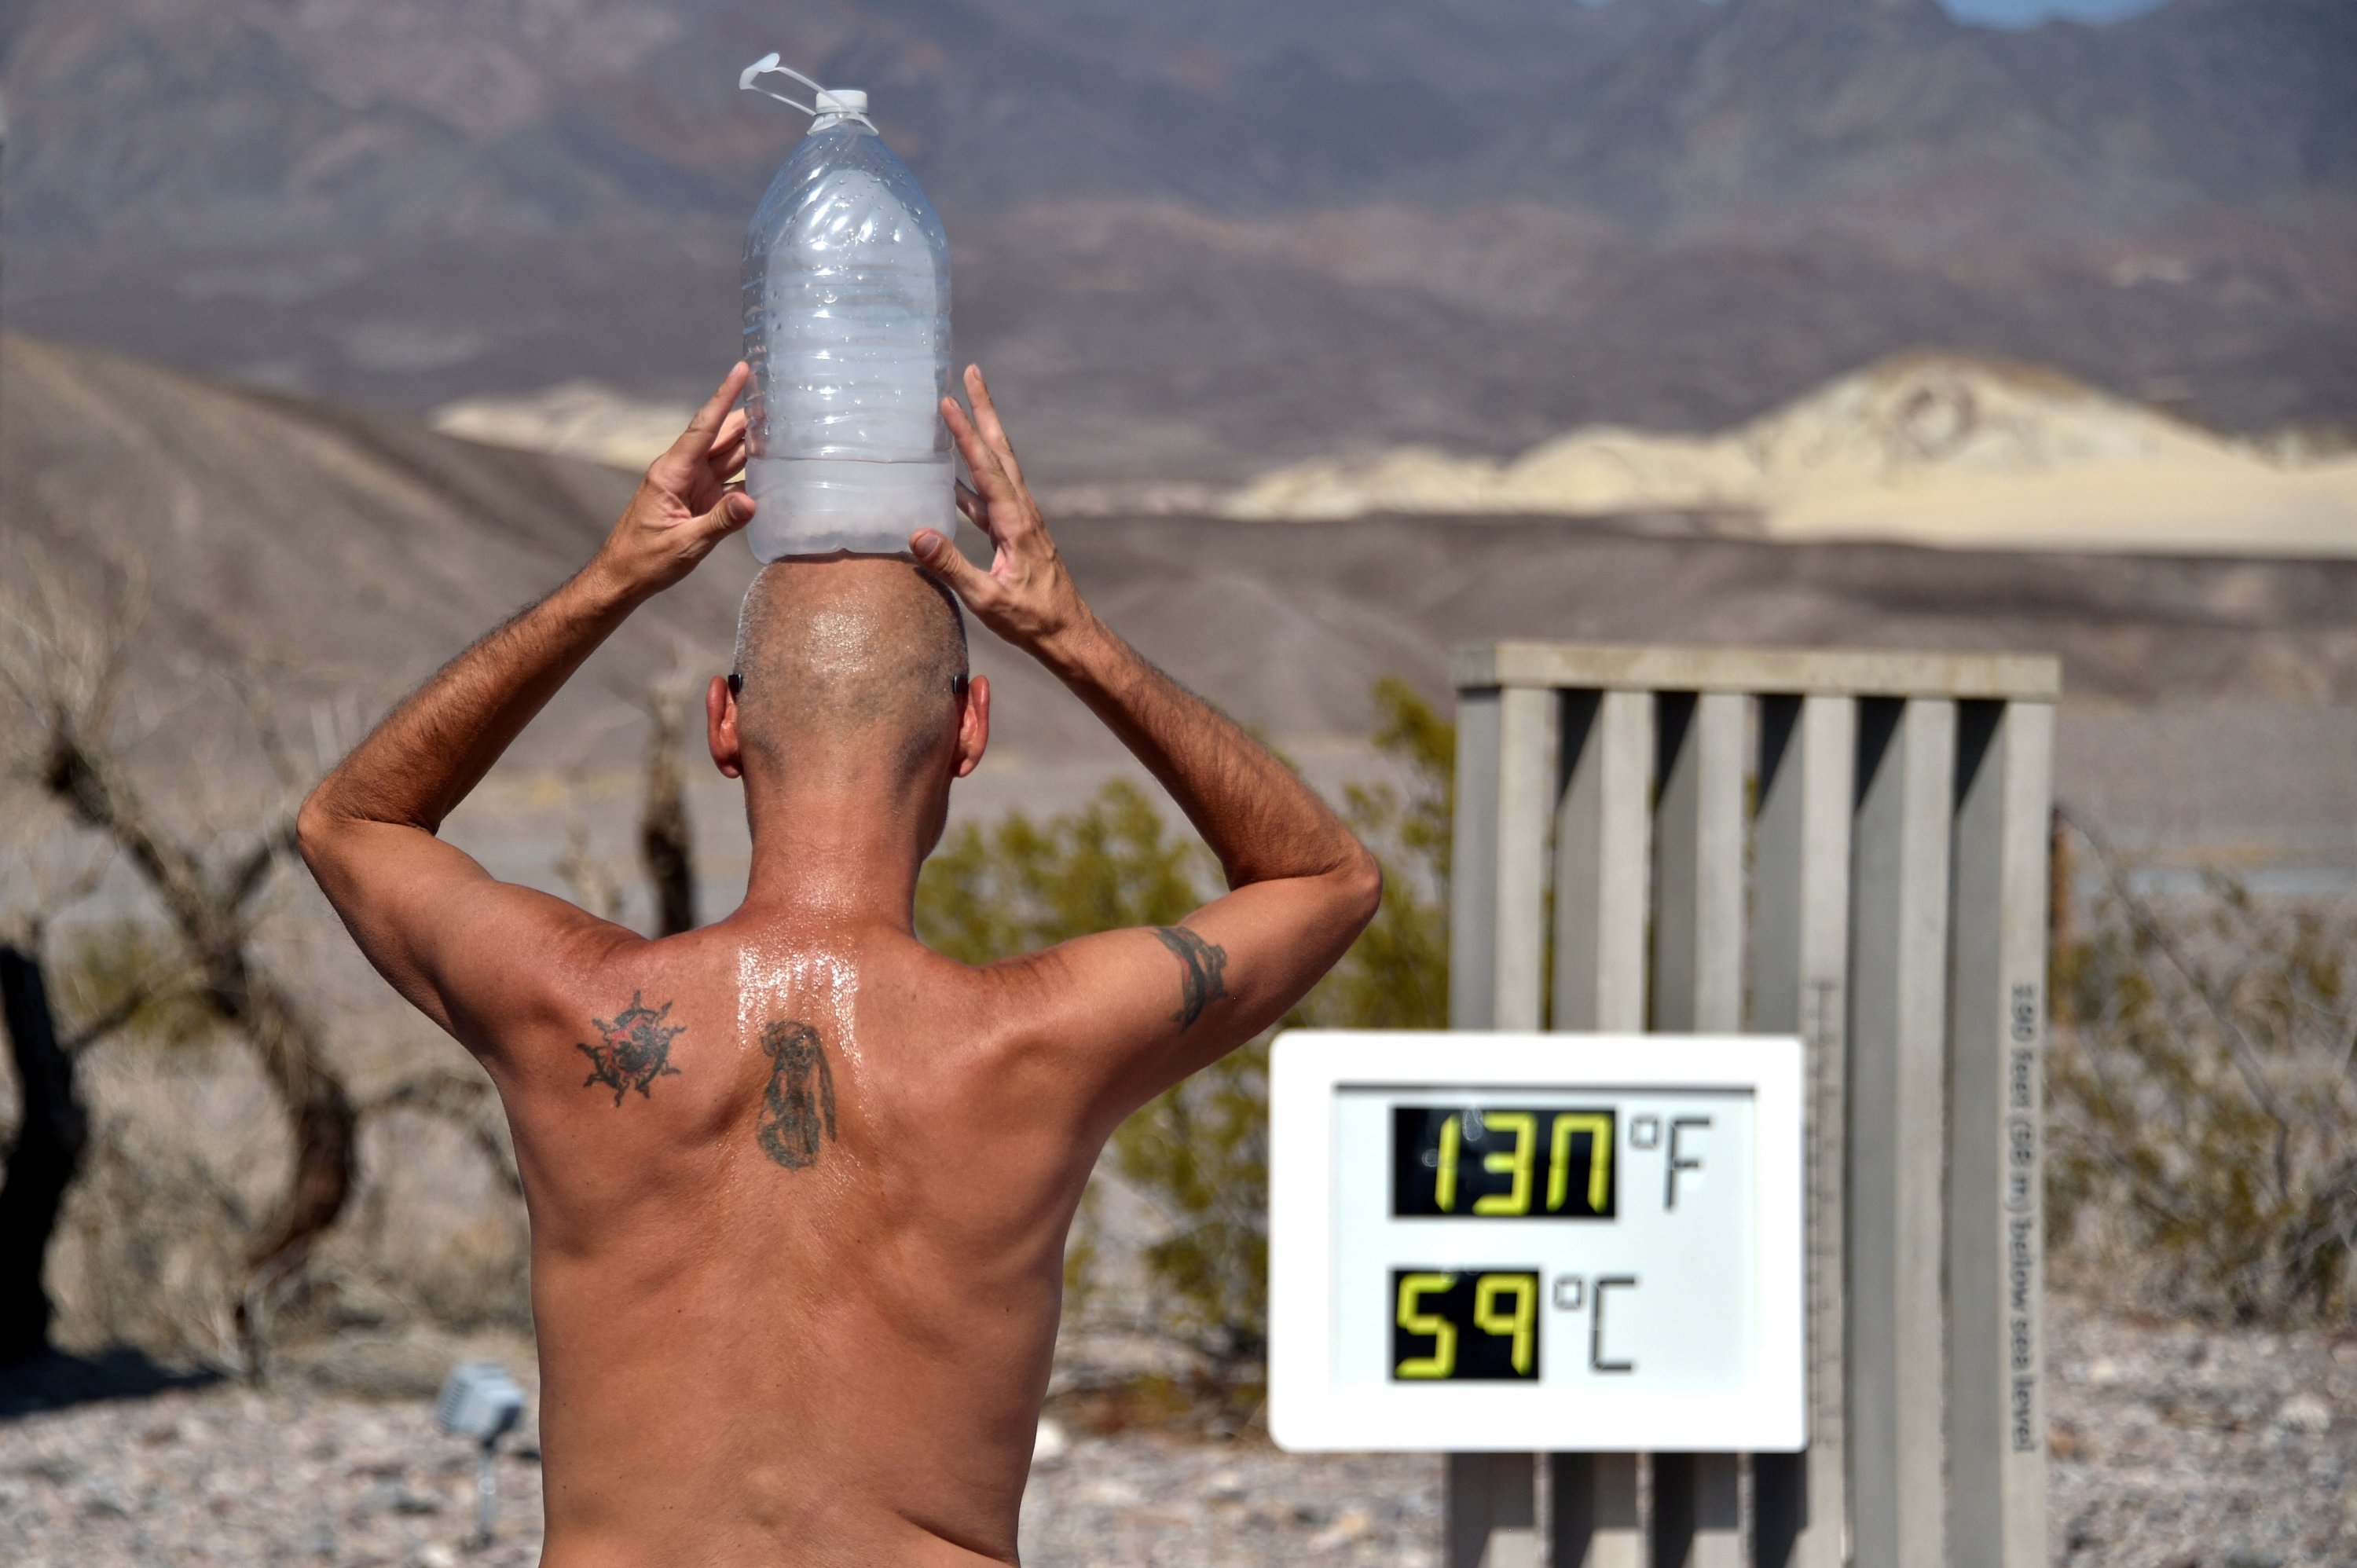 Steve Krofchik of Las Vegas keeps cool with a bottle of ice on his head as the unofficial thermometer reads 130 degrees Fahrenheit (54.4 Celsius), with a mechanical fault on the display which causes the numbers to render incorrectly, at the Furnace Creek Visitors Center in Death Valley, California, U.S. Aug. 17, 2020. (REUTERS Photo)